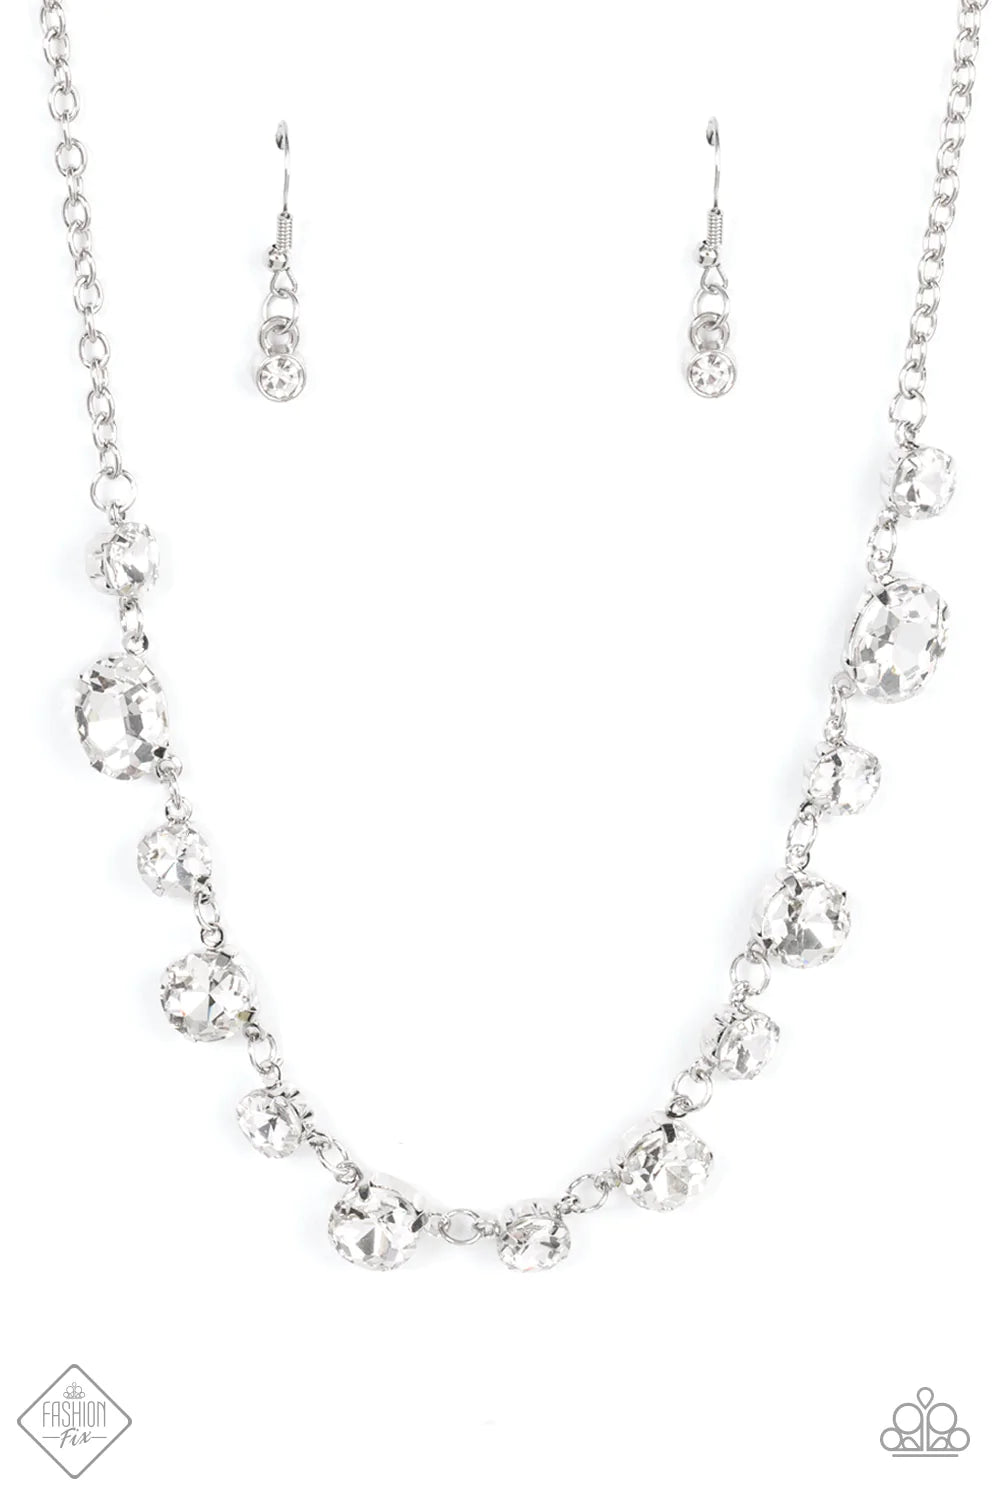 Paparazzi Necklace - Hands Off the Crown! - White